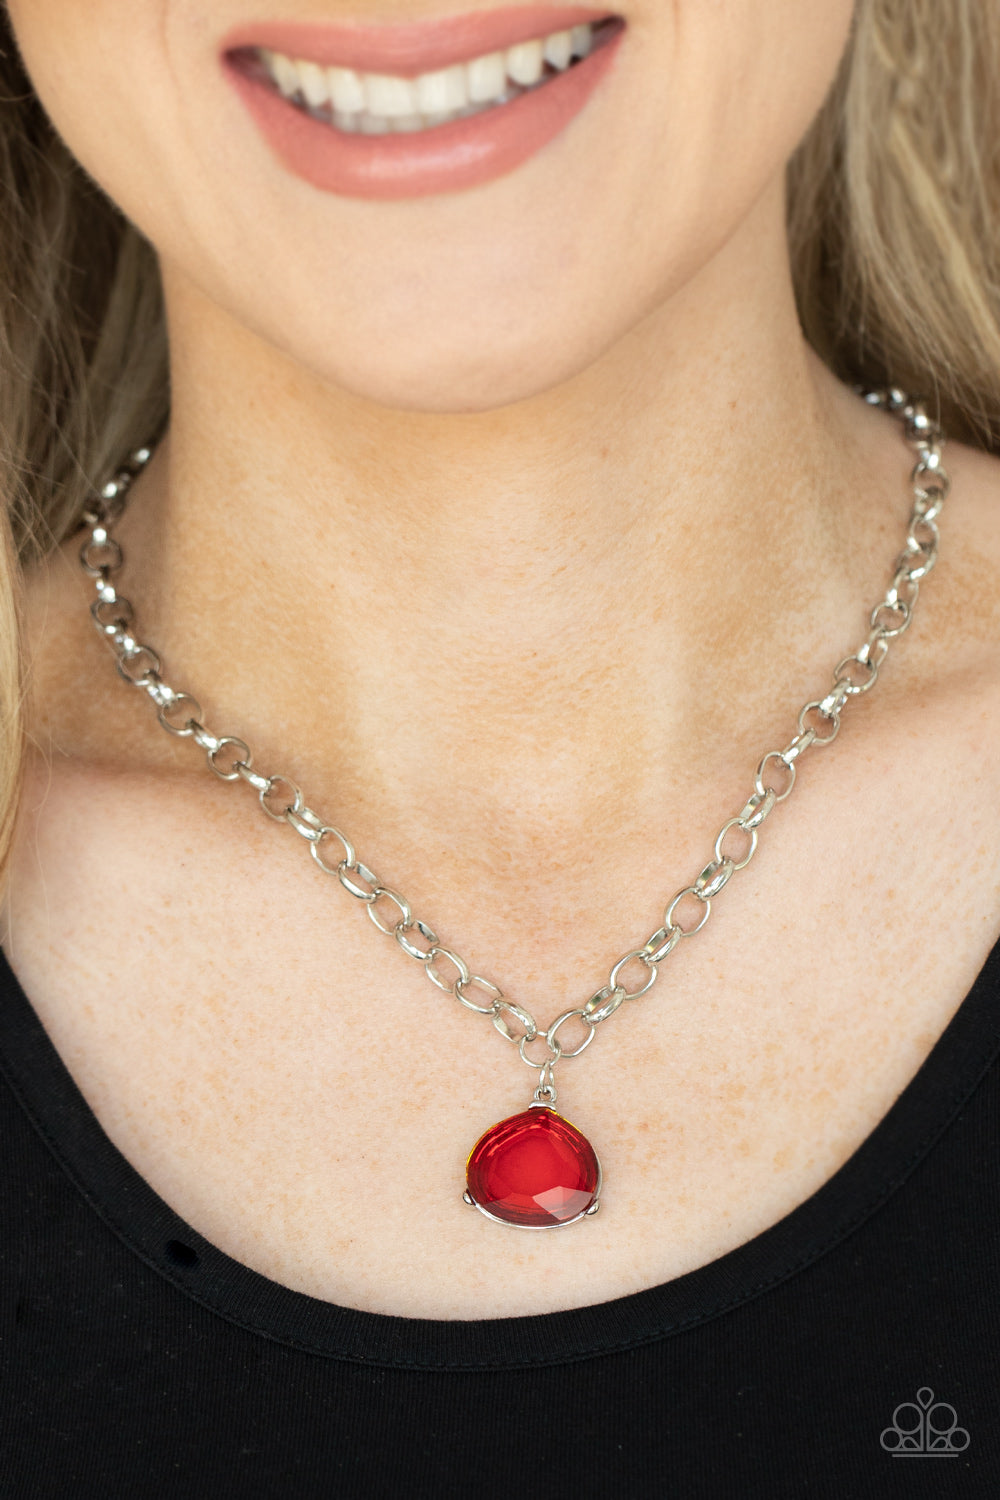 Gallery Gem - Red ***COMING SOON*** - Bling With Crystal